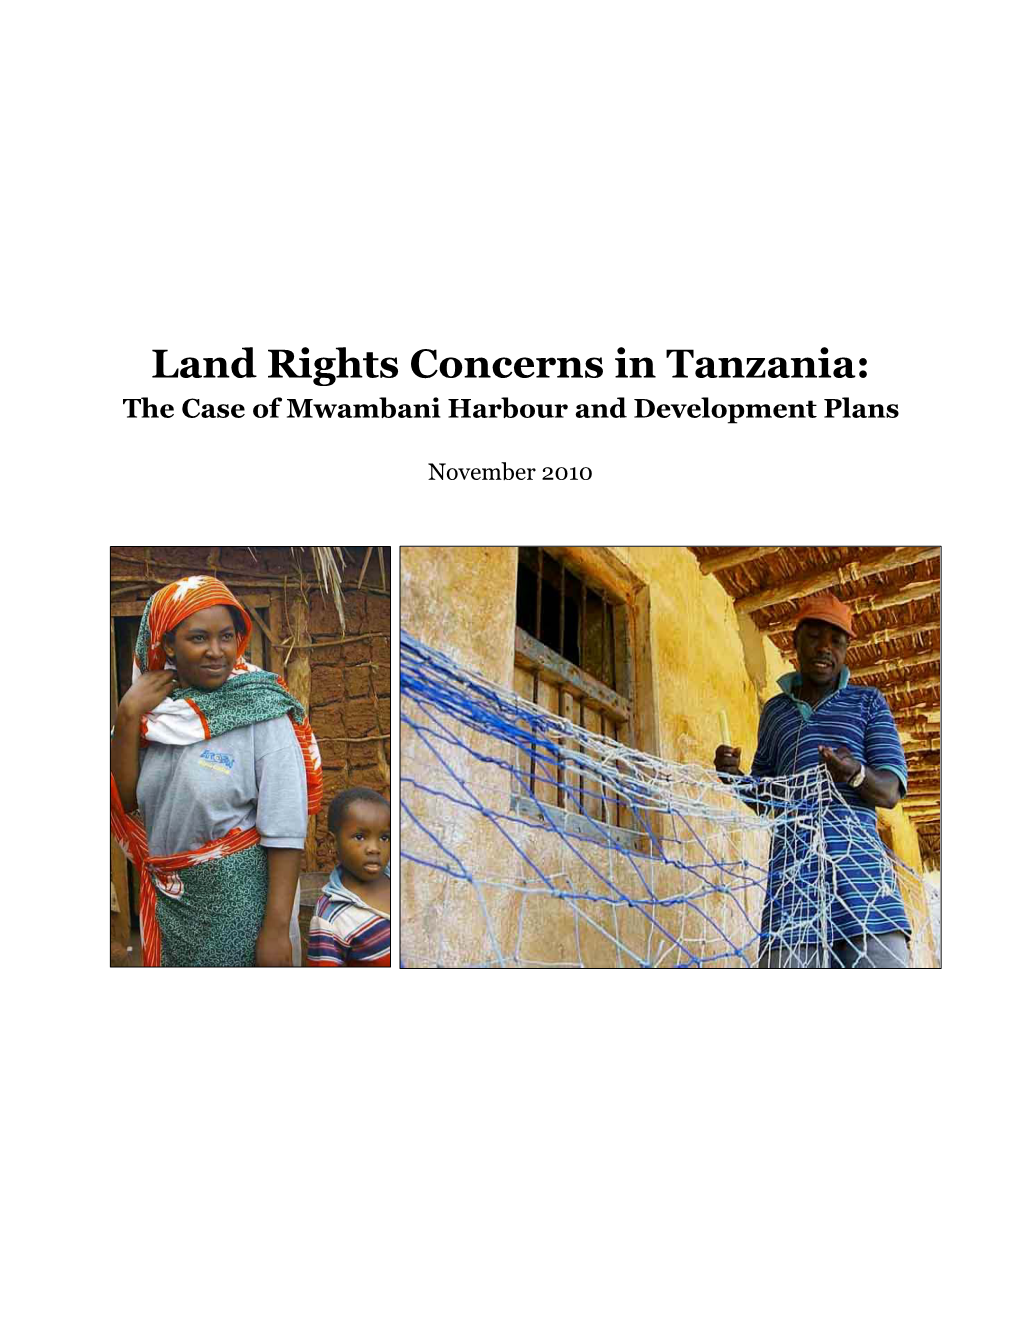 Land Rights Concerns in Tanzania: the Case of Mwambani Harbour and Development Plans